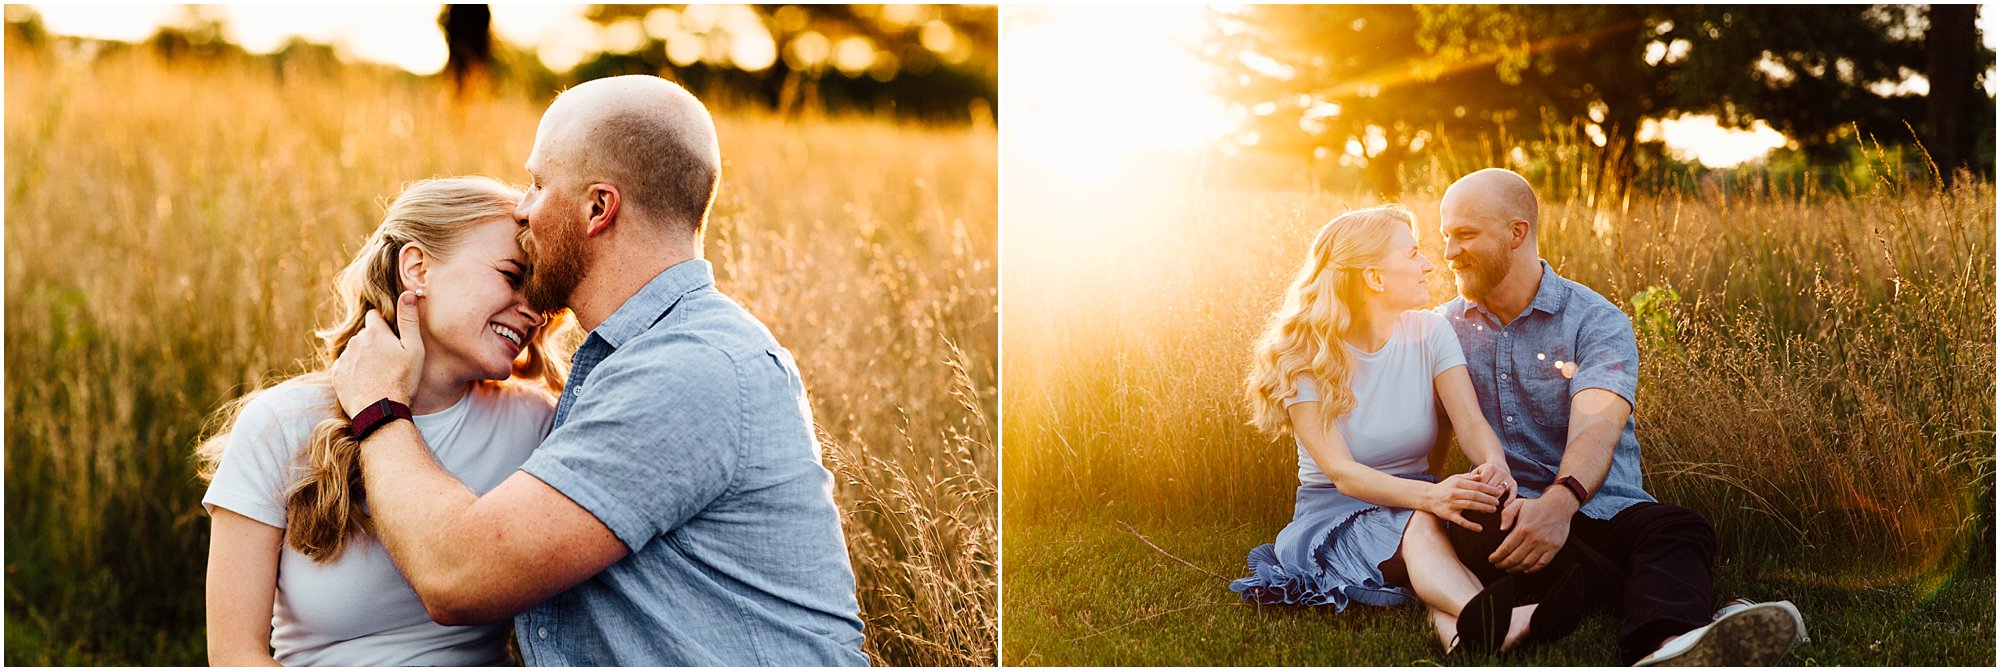 Couple sitting together and embracing during sunset in historic battleground field in Franklin, TN